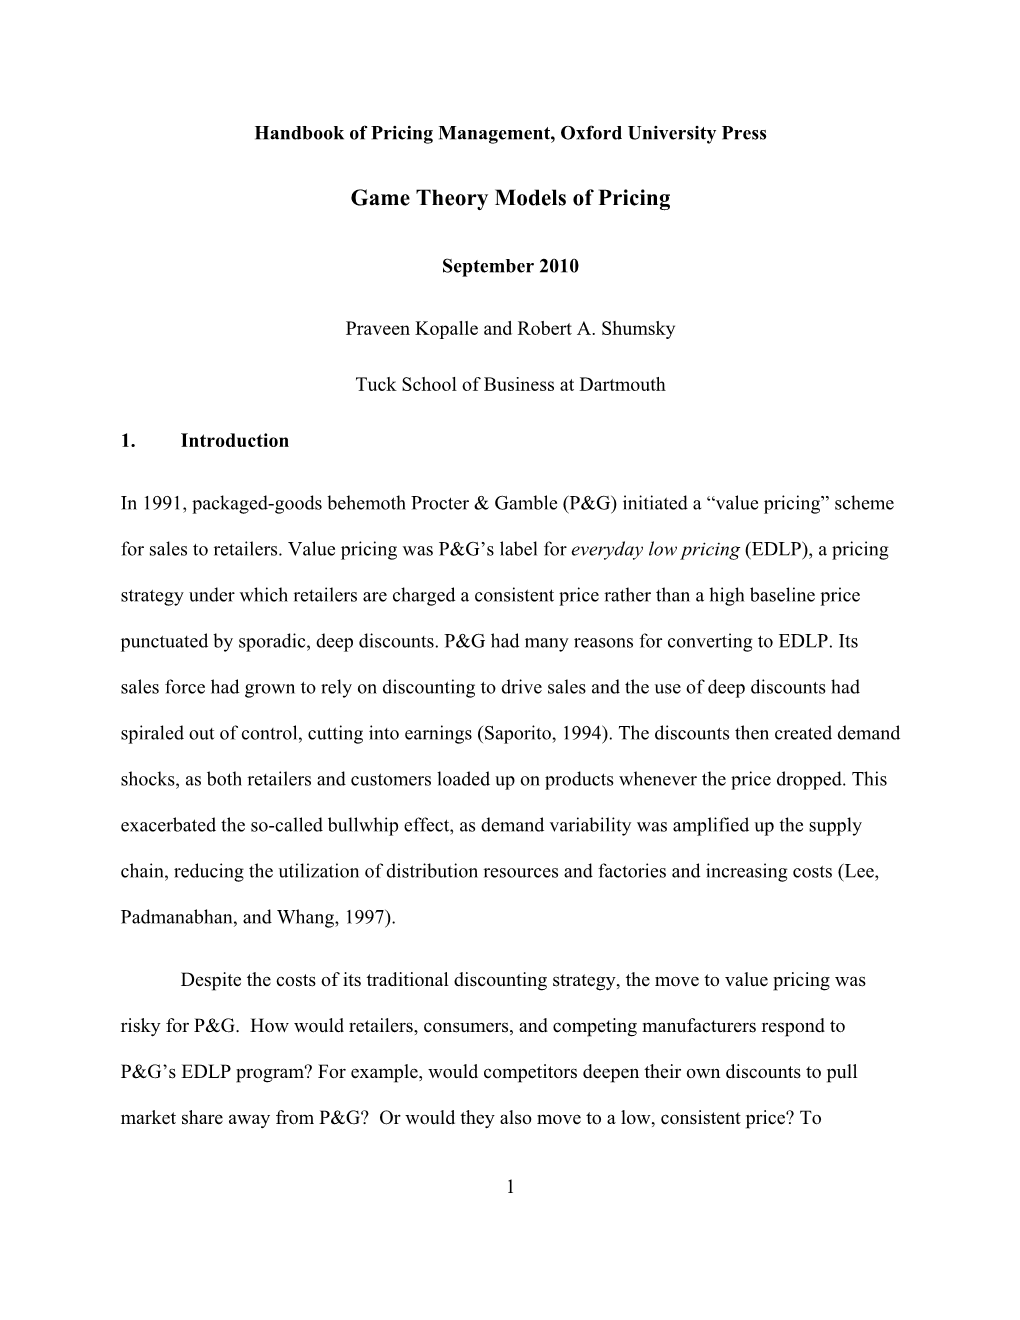 Game Theory Models of Pricing